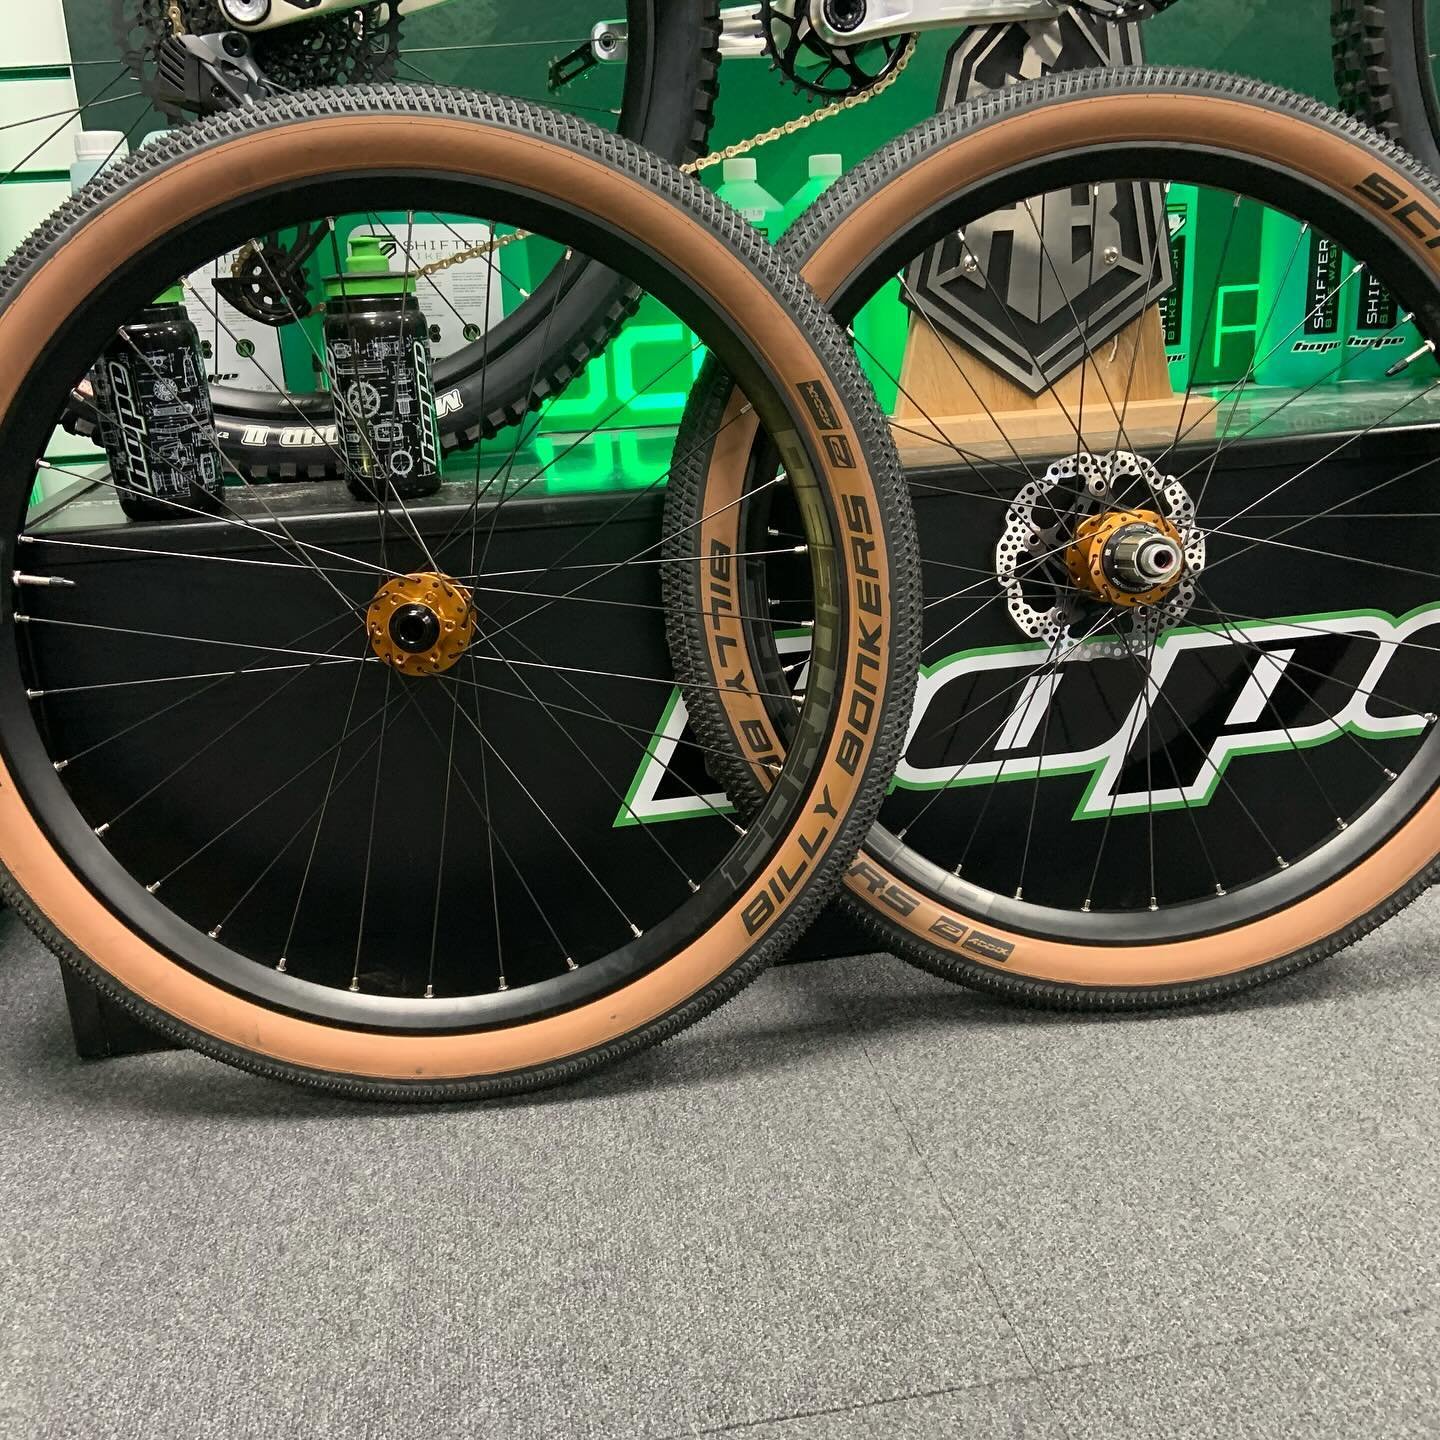 We thought it was time to start building the @dmrbikes #rhythm #dirtjump bike.
Colour coordination is key here and we are thinking #bronze is the key. @hopetech #26wheels complete with @schwalbetires #billybonkers along with @hopetech #stem and #head